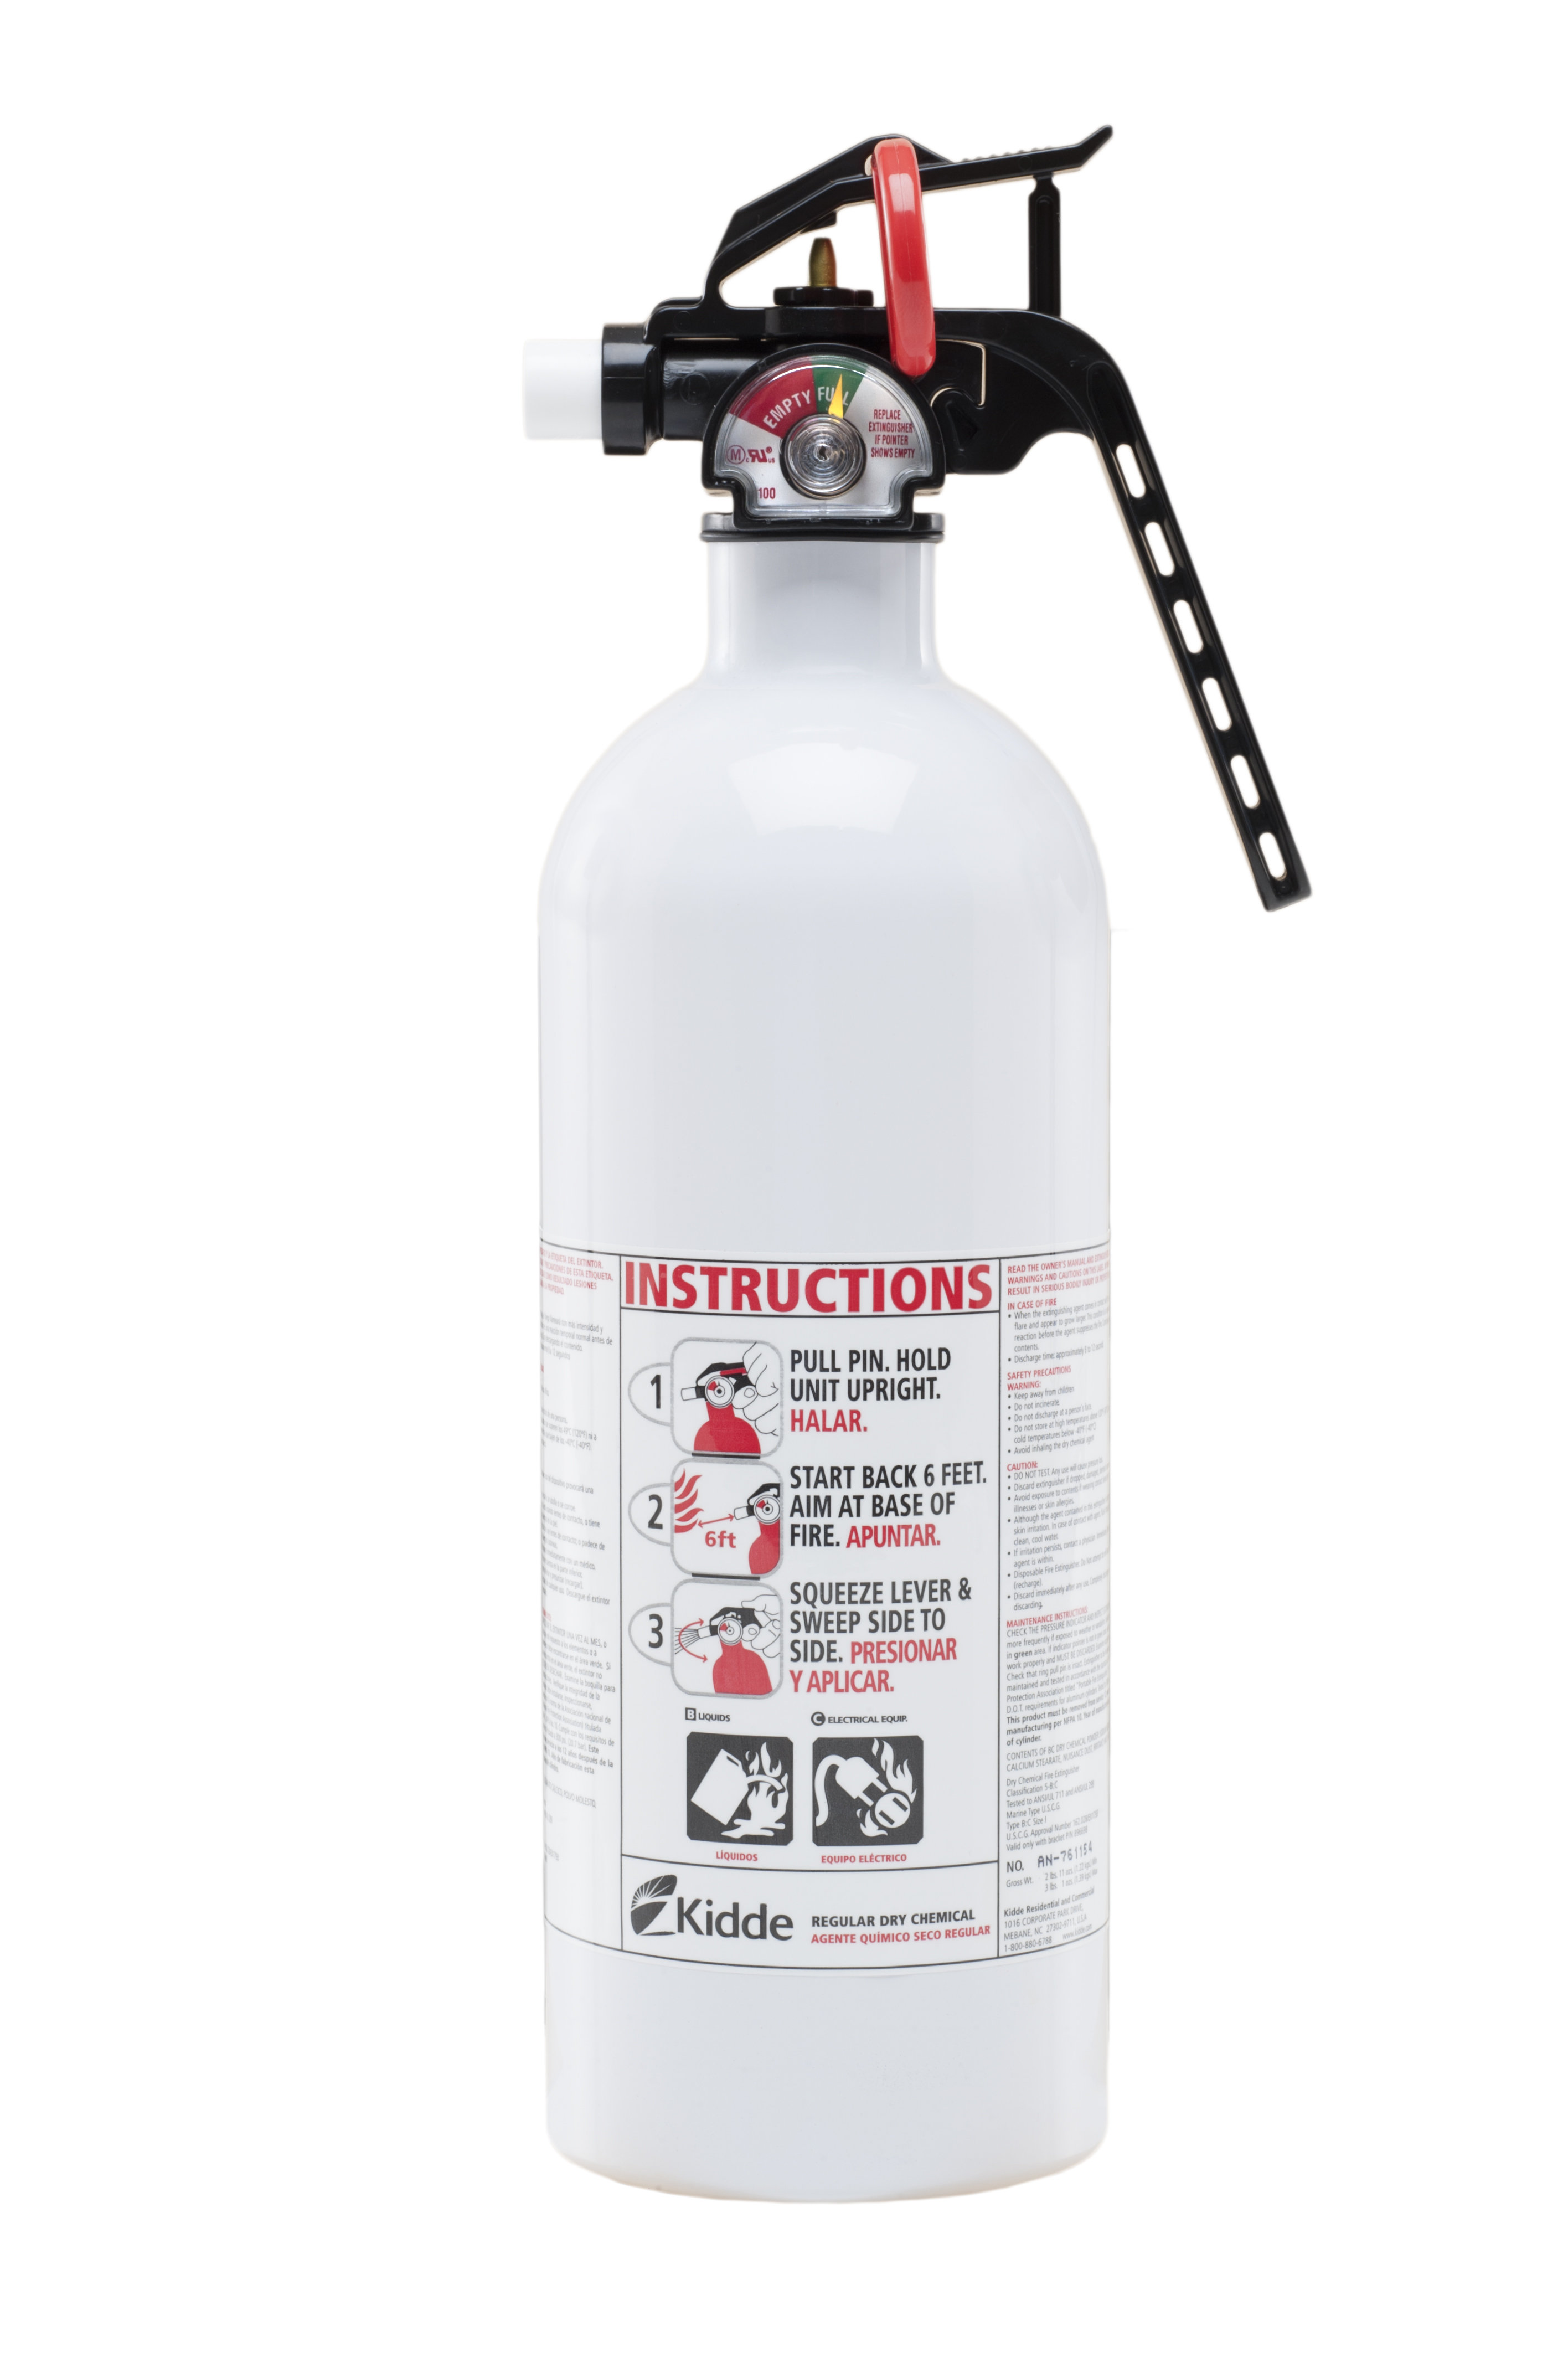 Oregon State Marine Board : Fire Extinguishers : Boater Info : State of